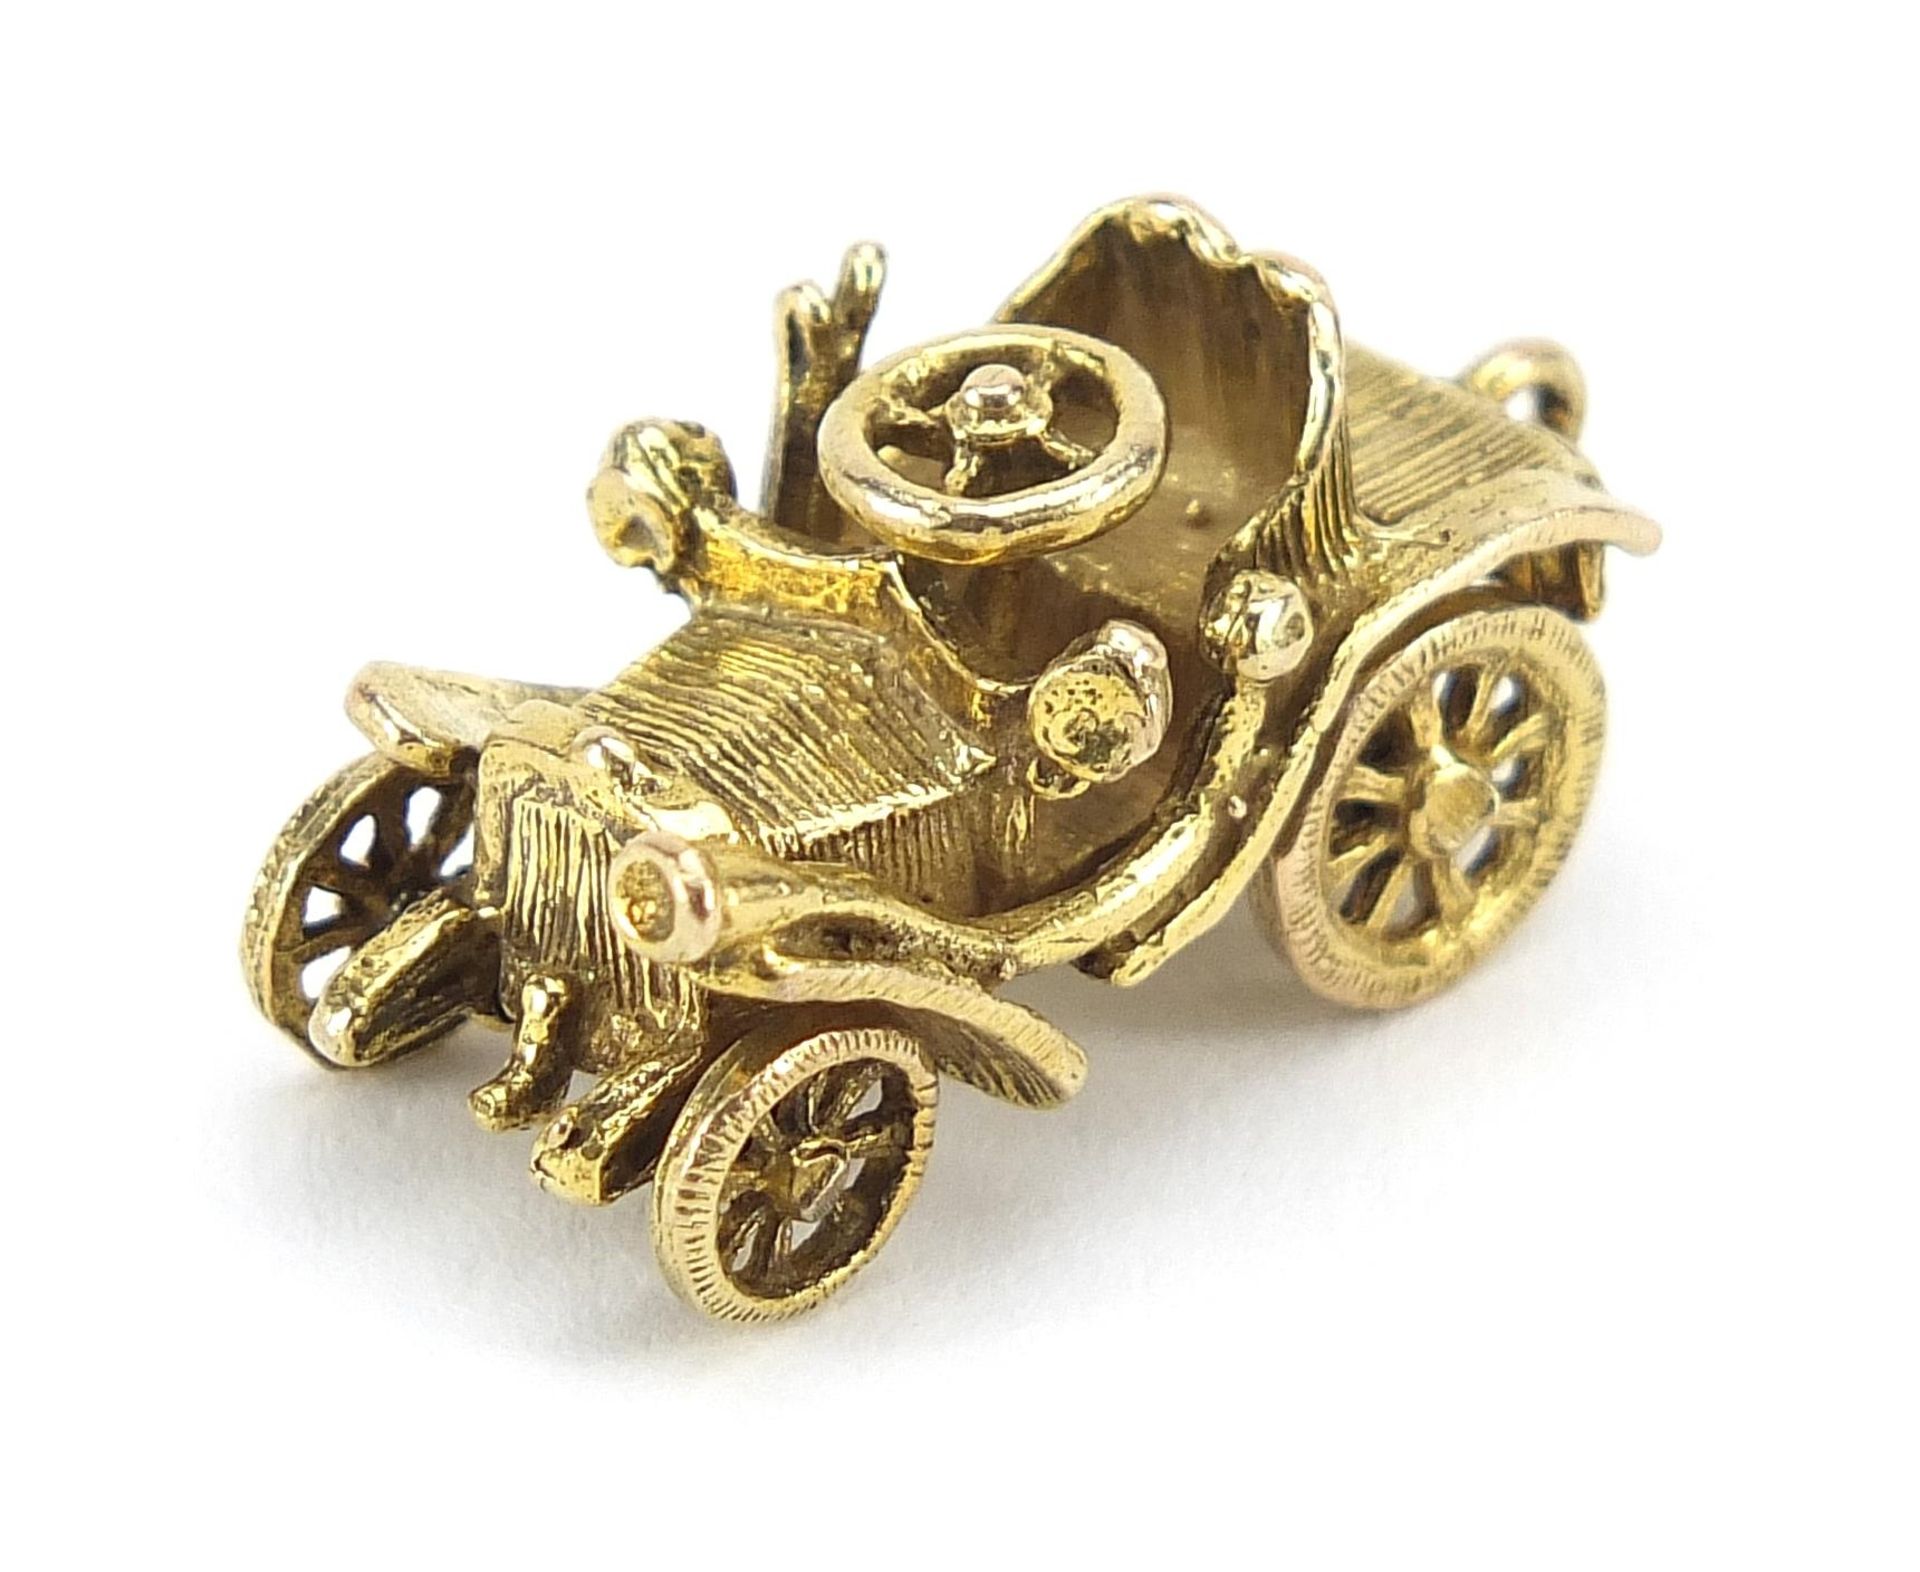 9ct gold classic car charm, 2.2cm in length, 4.5g